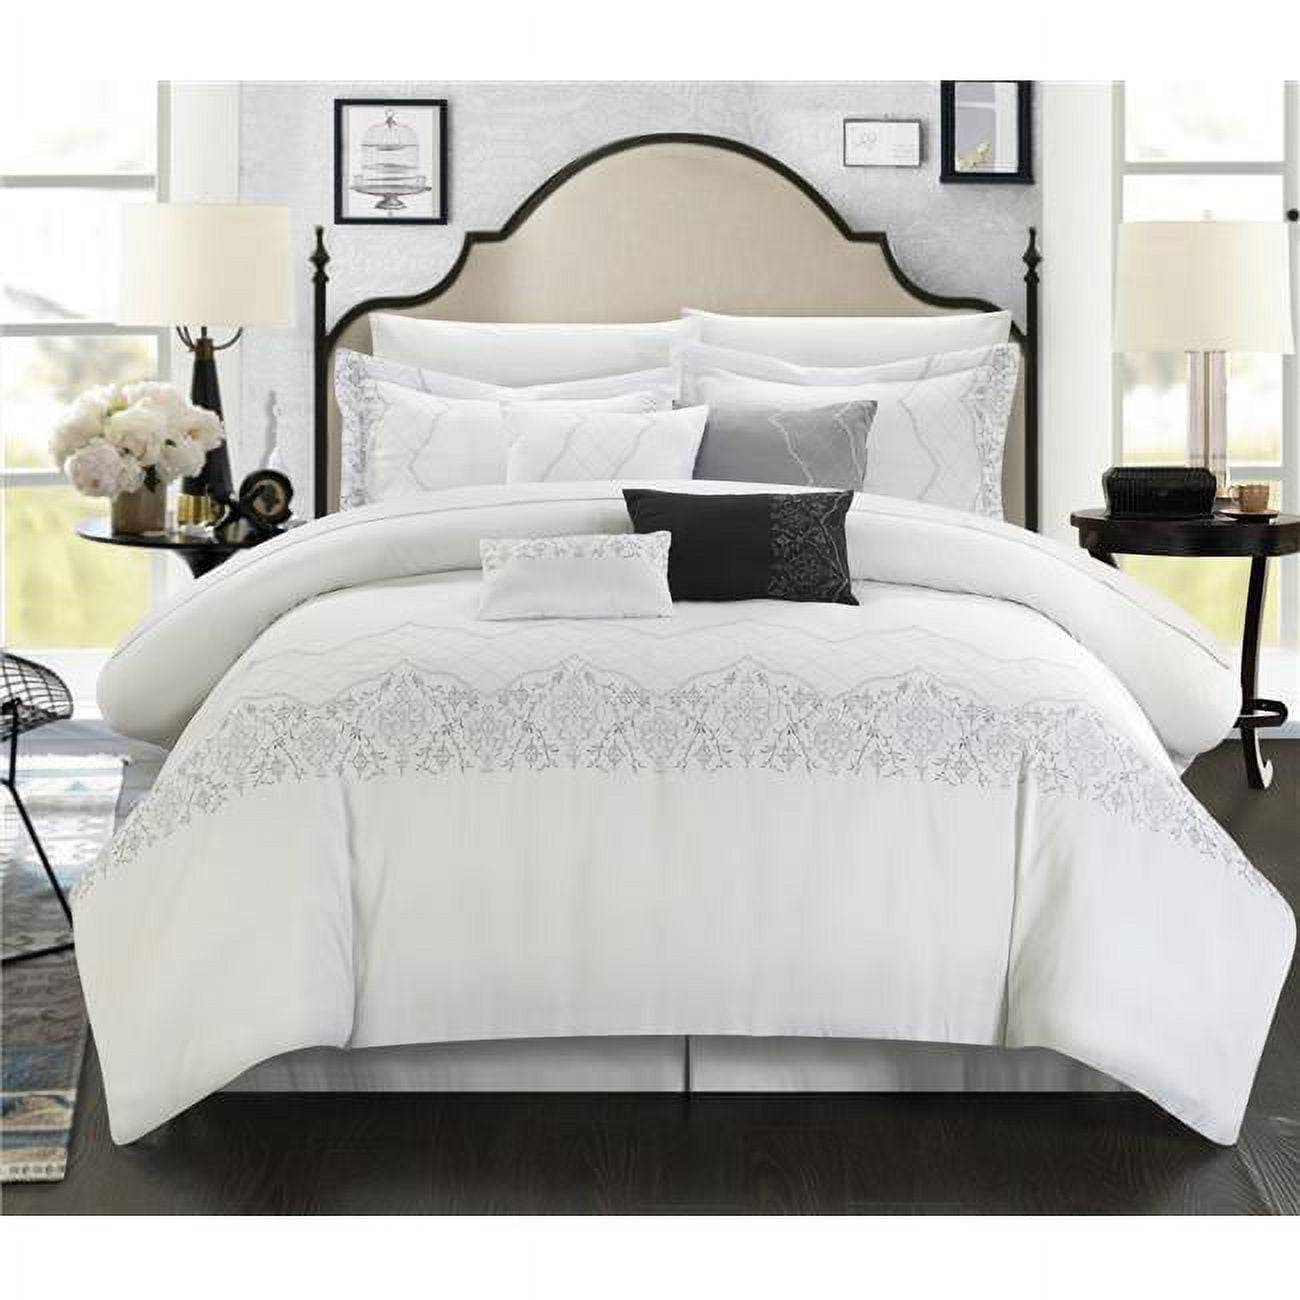 105cq107-us Elegan Embroidered Bridal Collection Comforter Set - White - Queen - 8 Piece